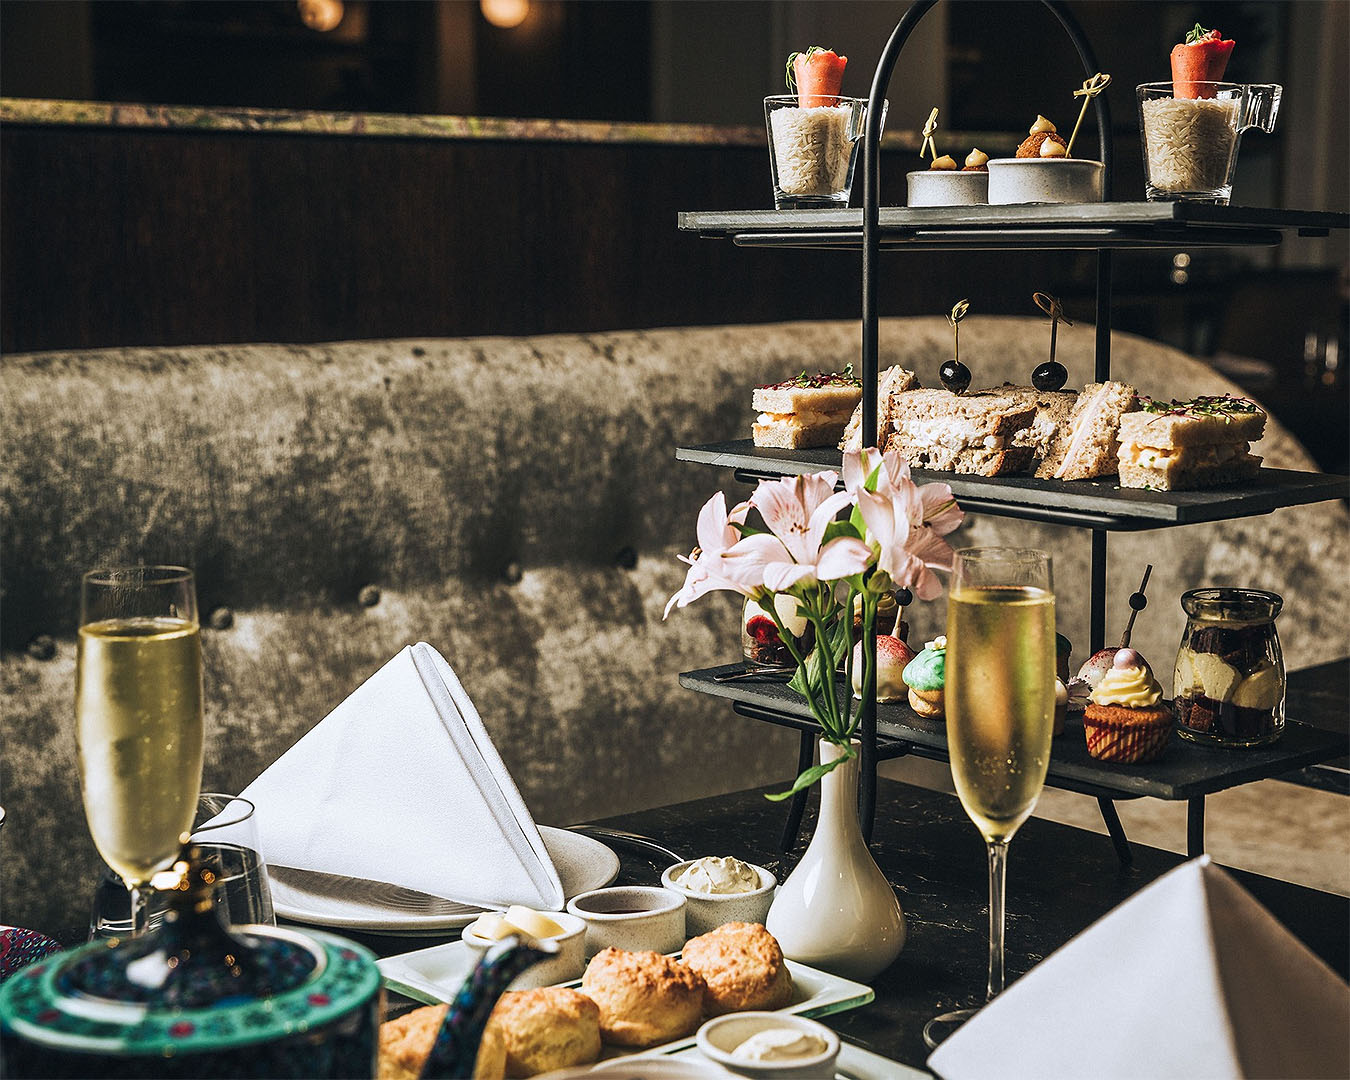 A delicious looking spread at Cooke's with glasses of champagne on standby. This is definitely one of the best high teas in Auckland.